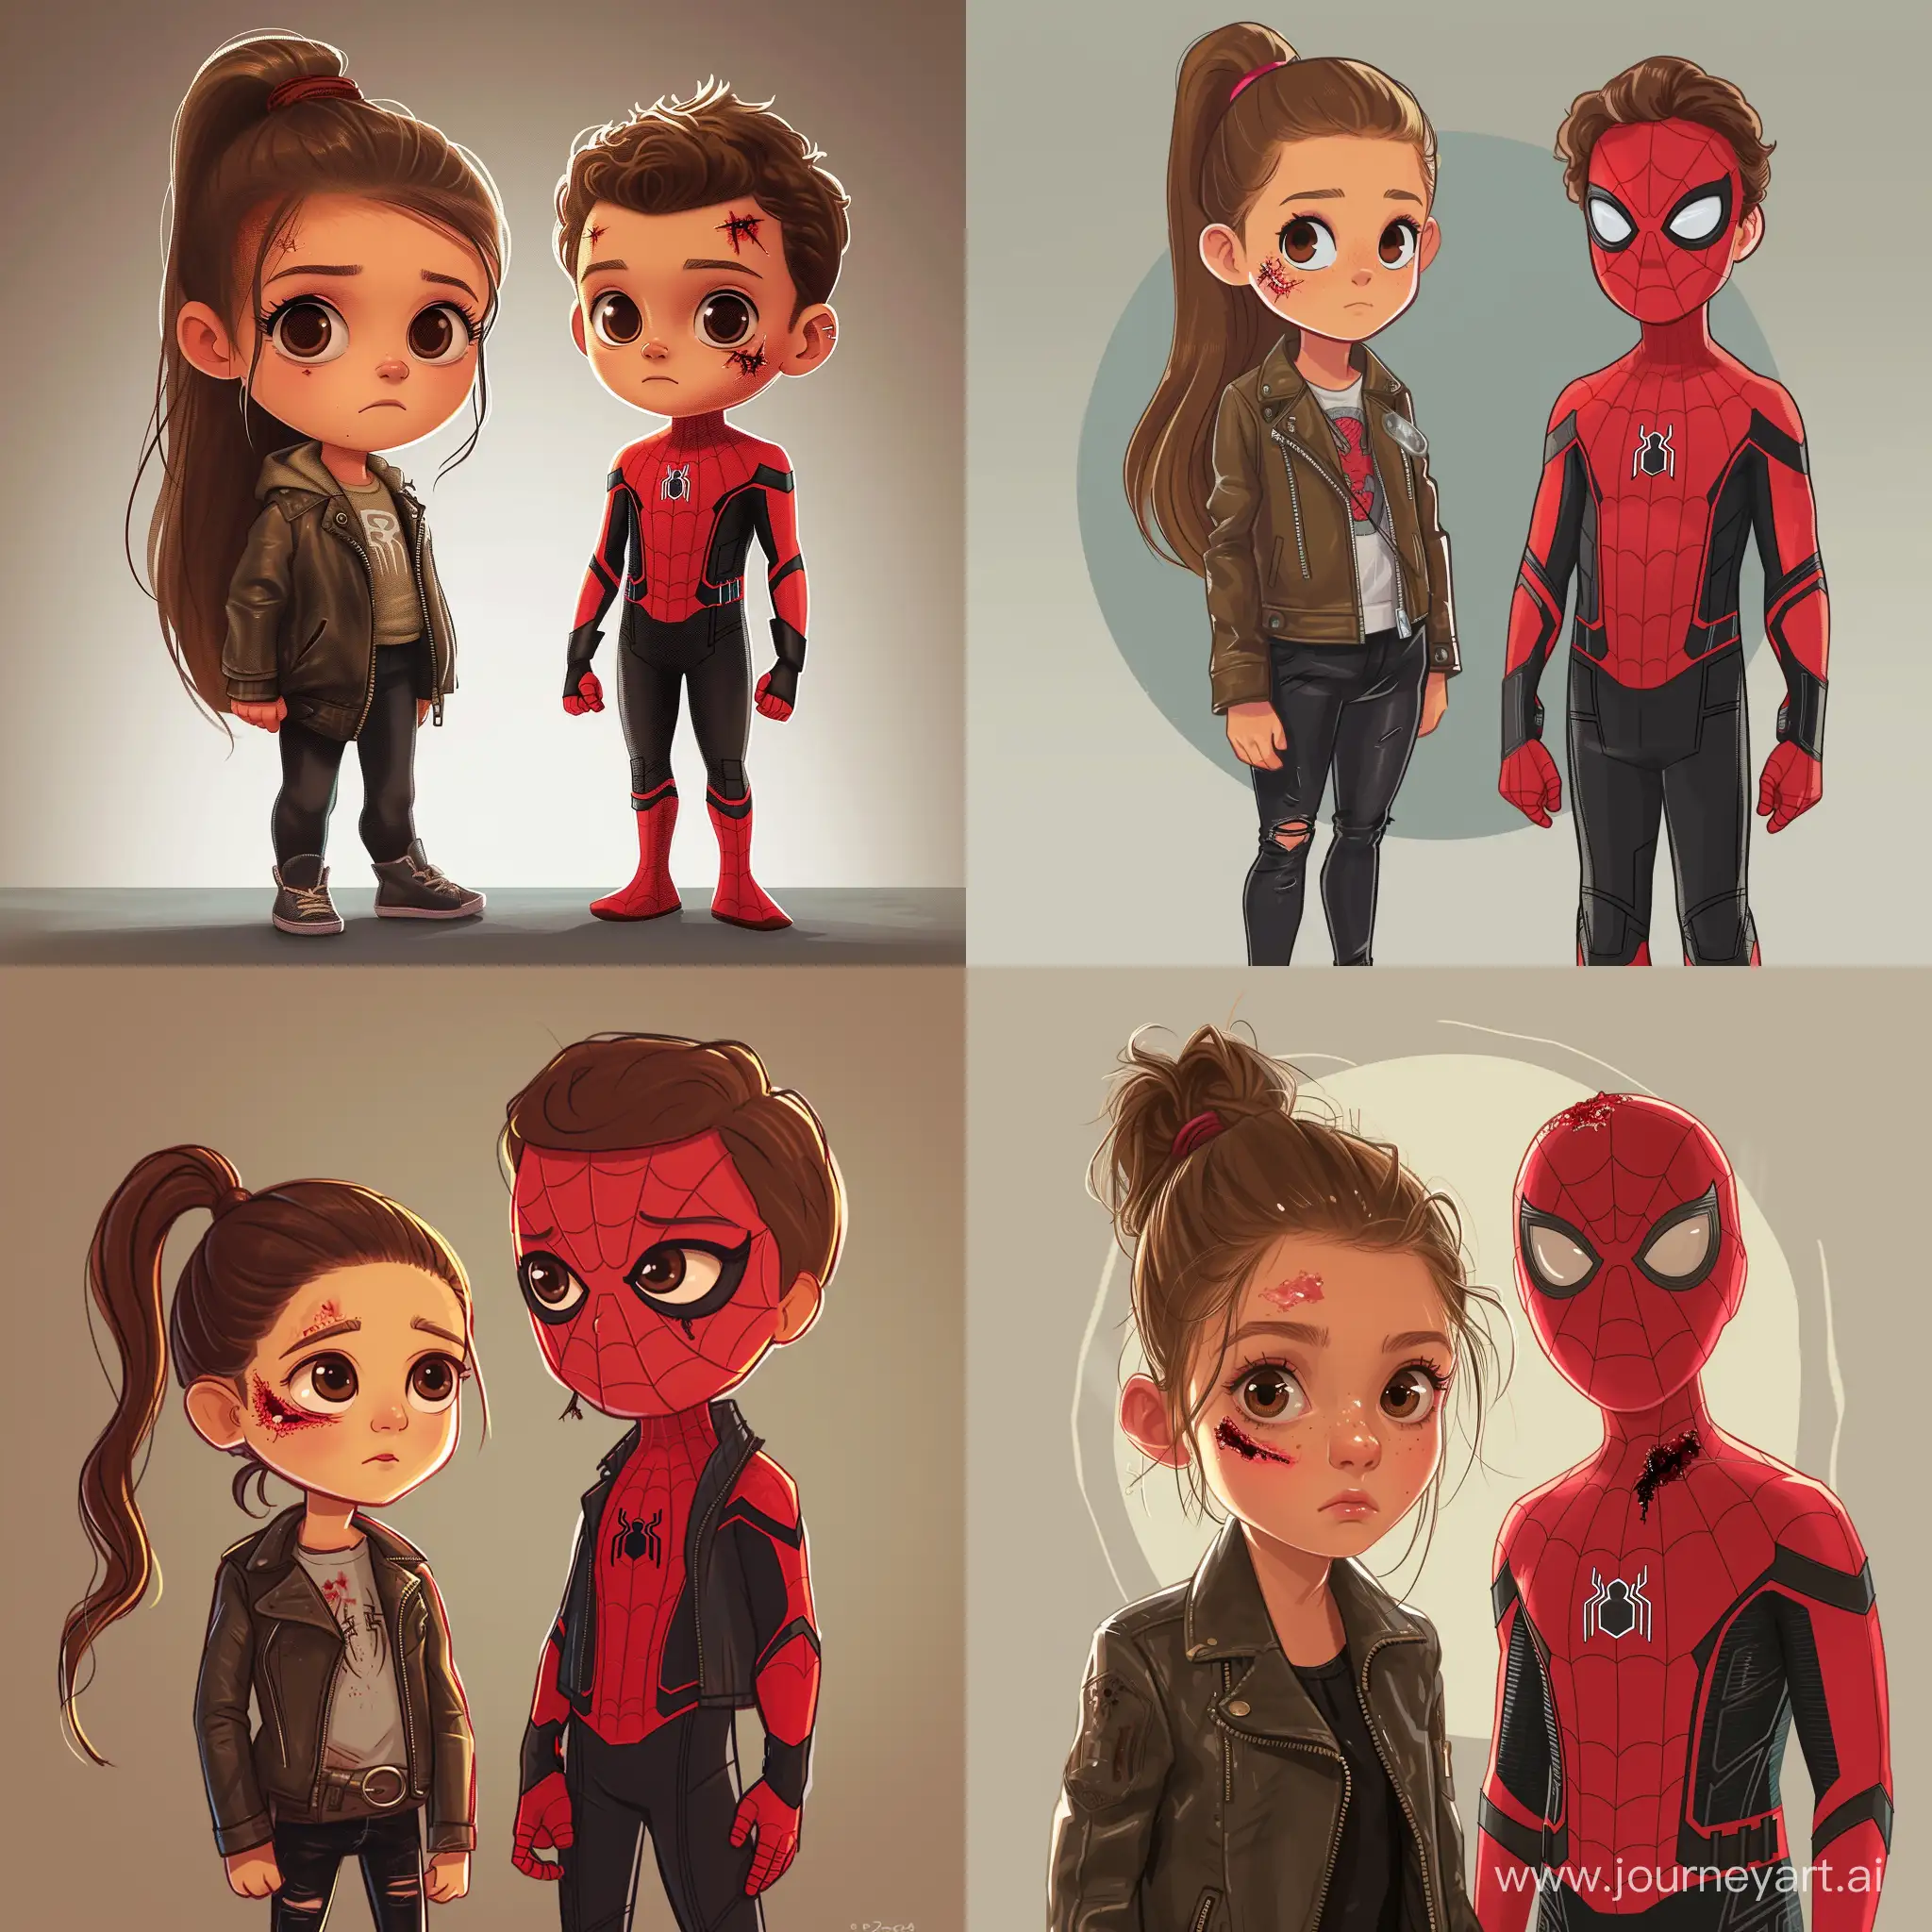 17 year old girl, brown hair in a ponytail, brown eyes, a small cut on her face, leather jacket, black pants, spider man beside her, spider man has his suit on, spider man has his mask off, he looks like the tom holland spider man, he has a small cut on his face, there is a rip in his suit, cartoon style